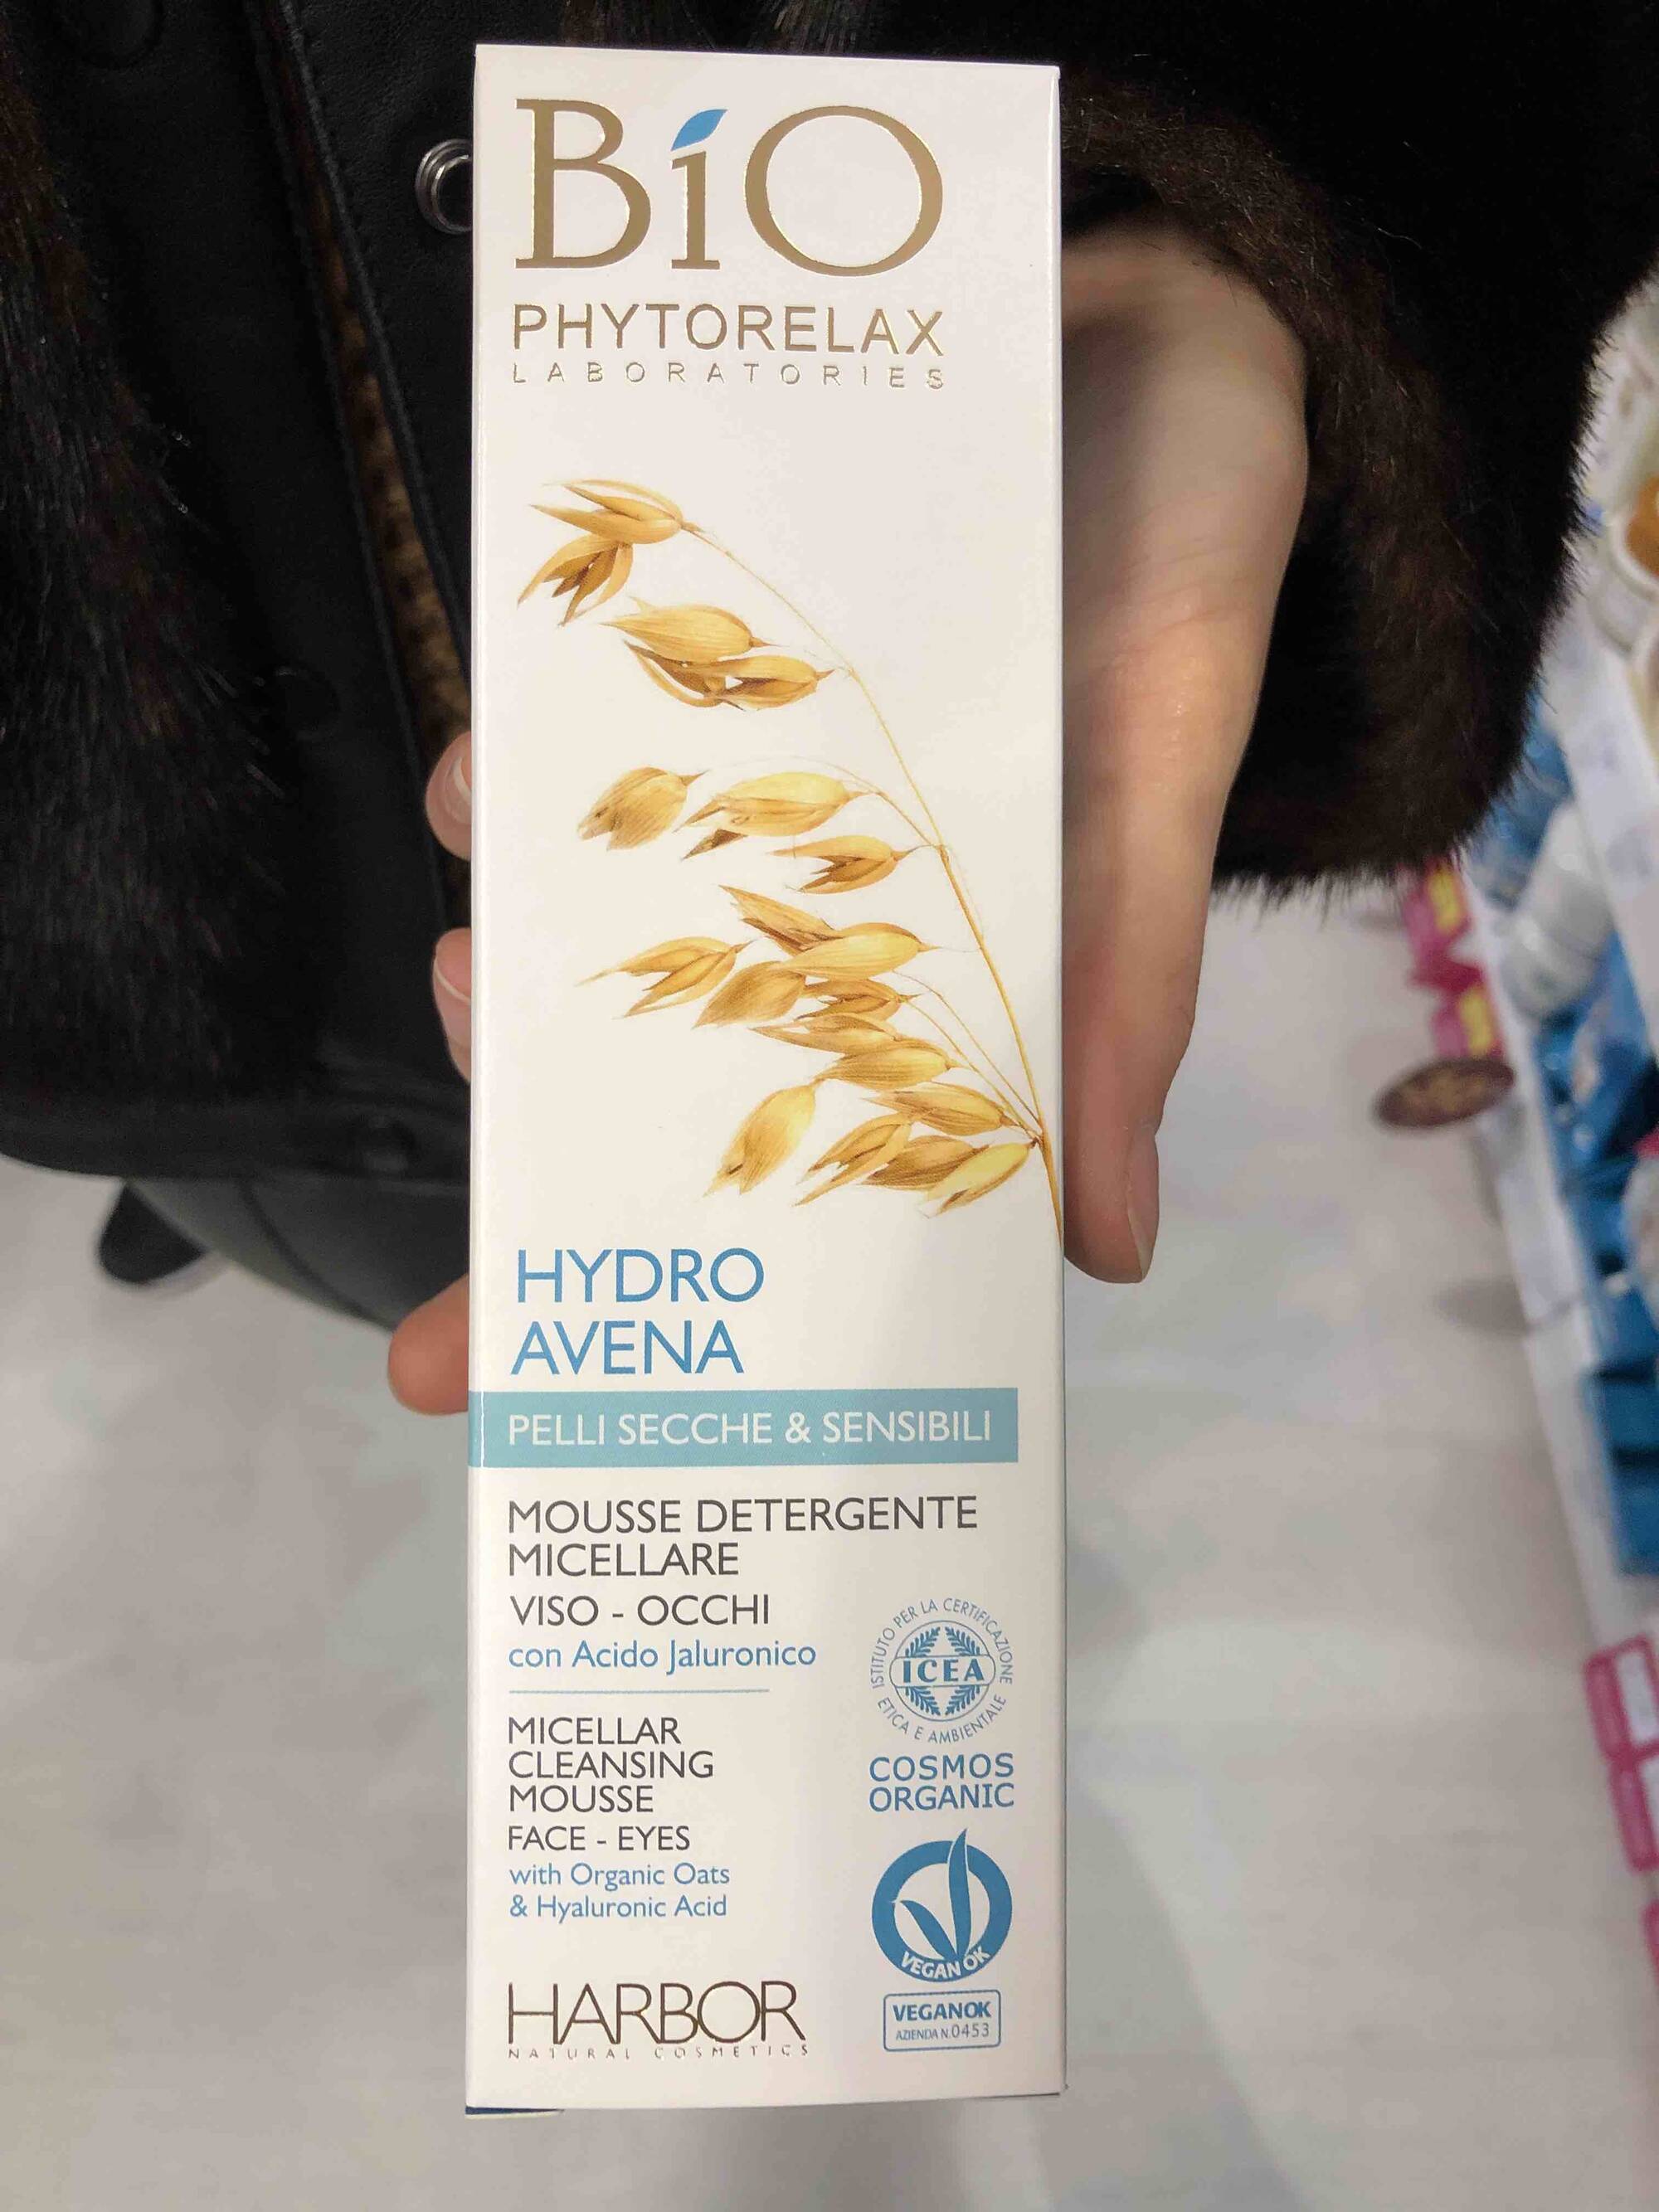 BIO PHYTORELAX - Hydro avena - Mousse détergente micellaire